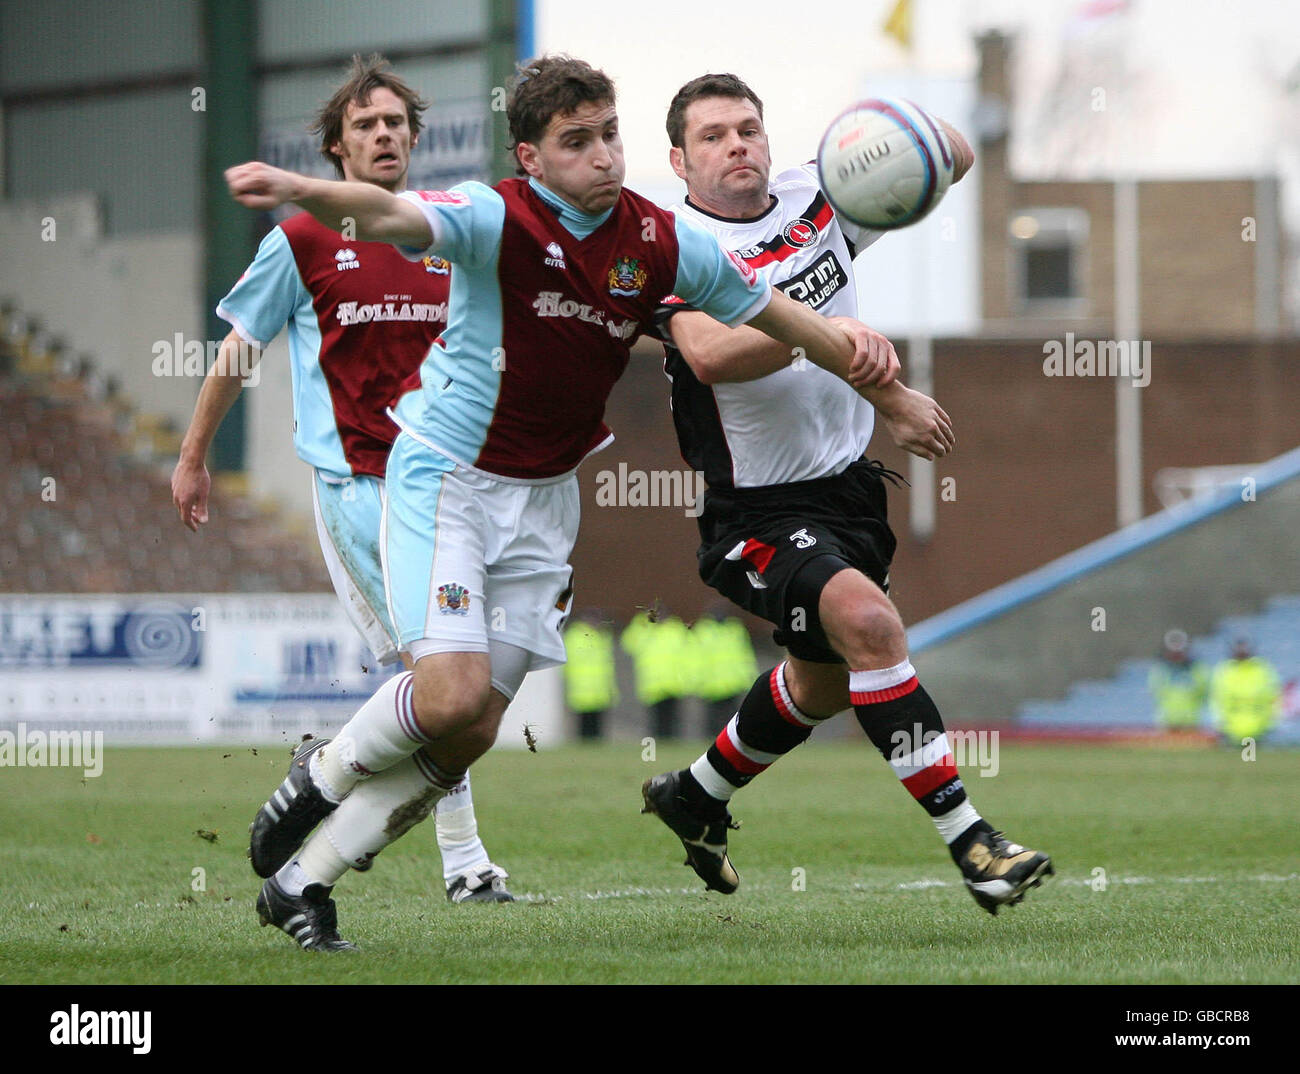 Soccer - Coca-Cola Football League Championship - Burnley v Charlton Athletic - Turf Moor. Burnley's Martin Paterson and Charlton Athletic's Graeme Murty during the Coca-Cola Championship match at Turf Moor, Burnley. Stock Photo